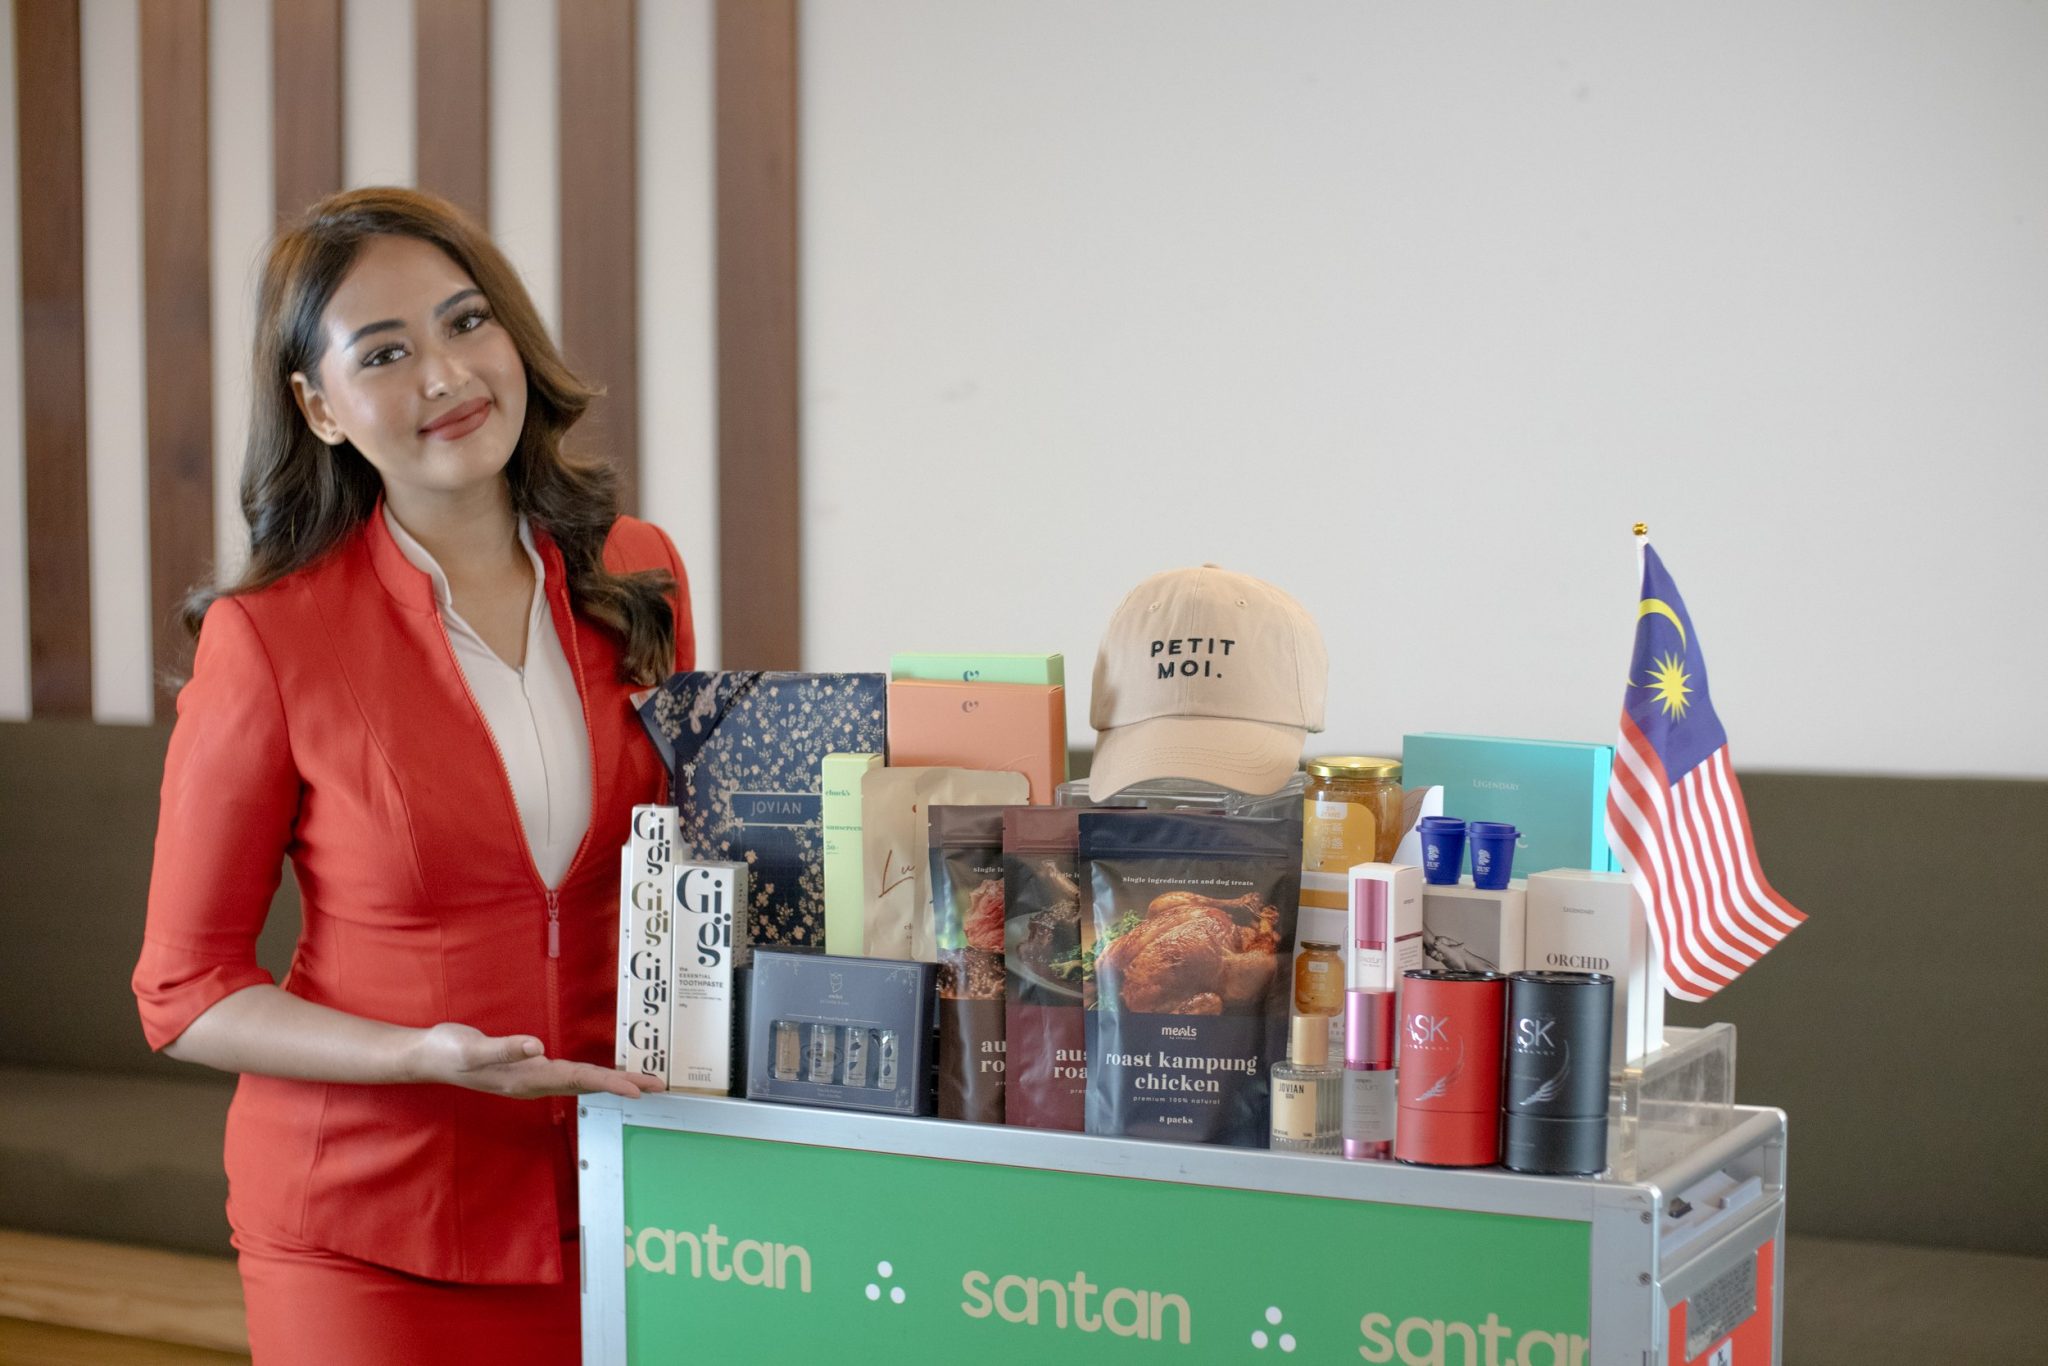 Santan elevates AirAsia inflight experience with local brands